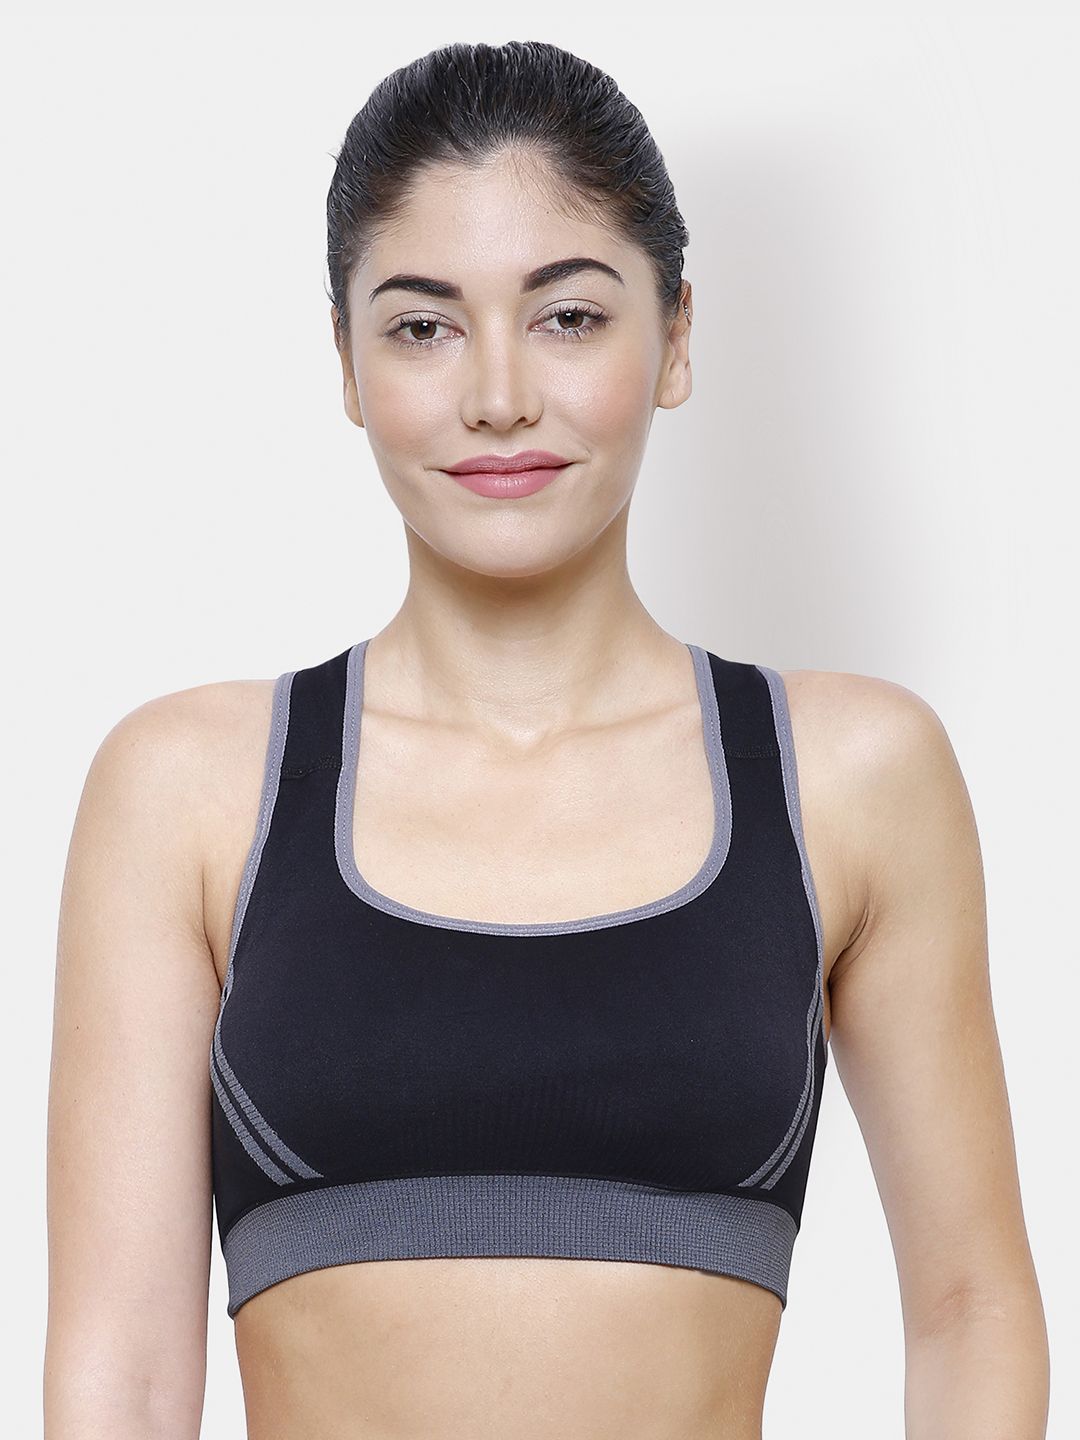 FashionRack Black Solid Non-Wired Lightly Padded Sports Bra 3601 Price in India